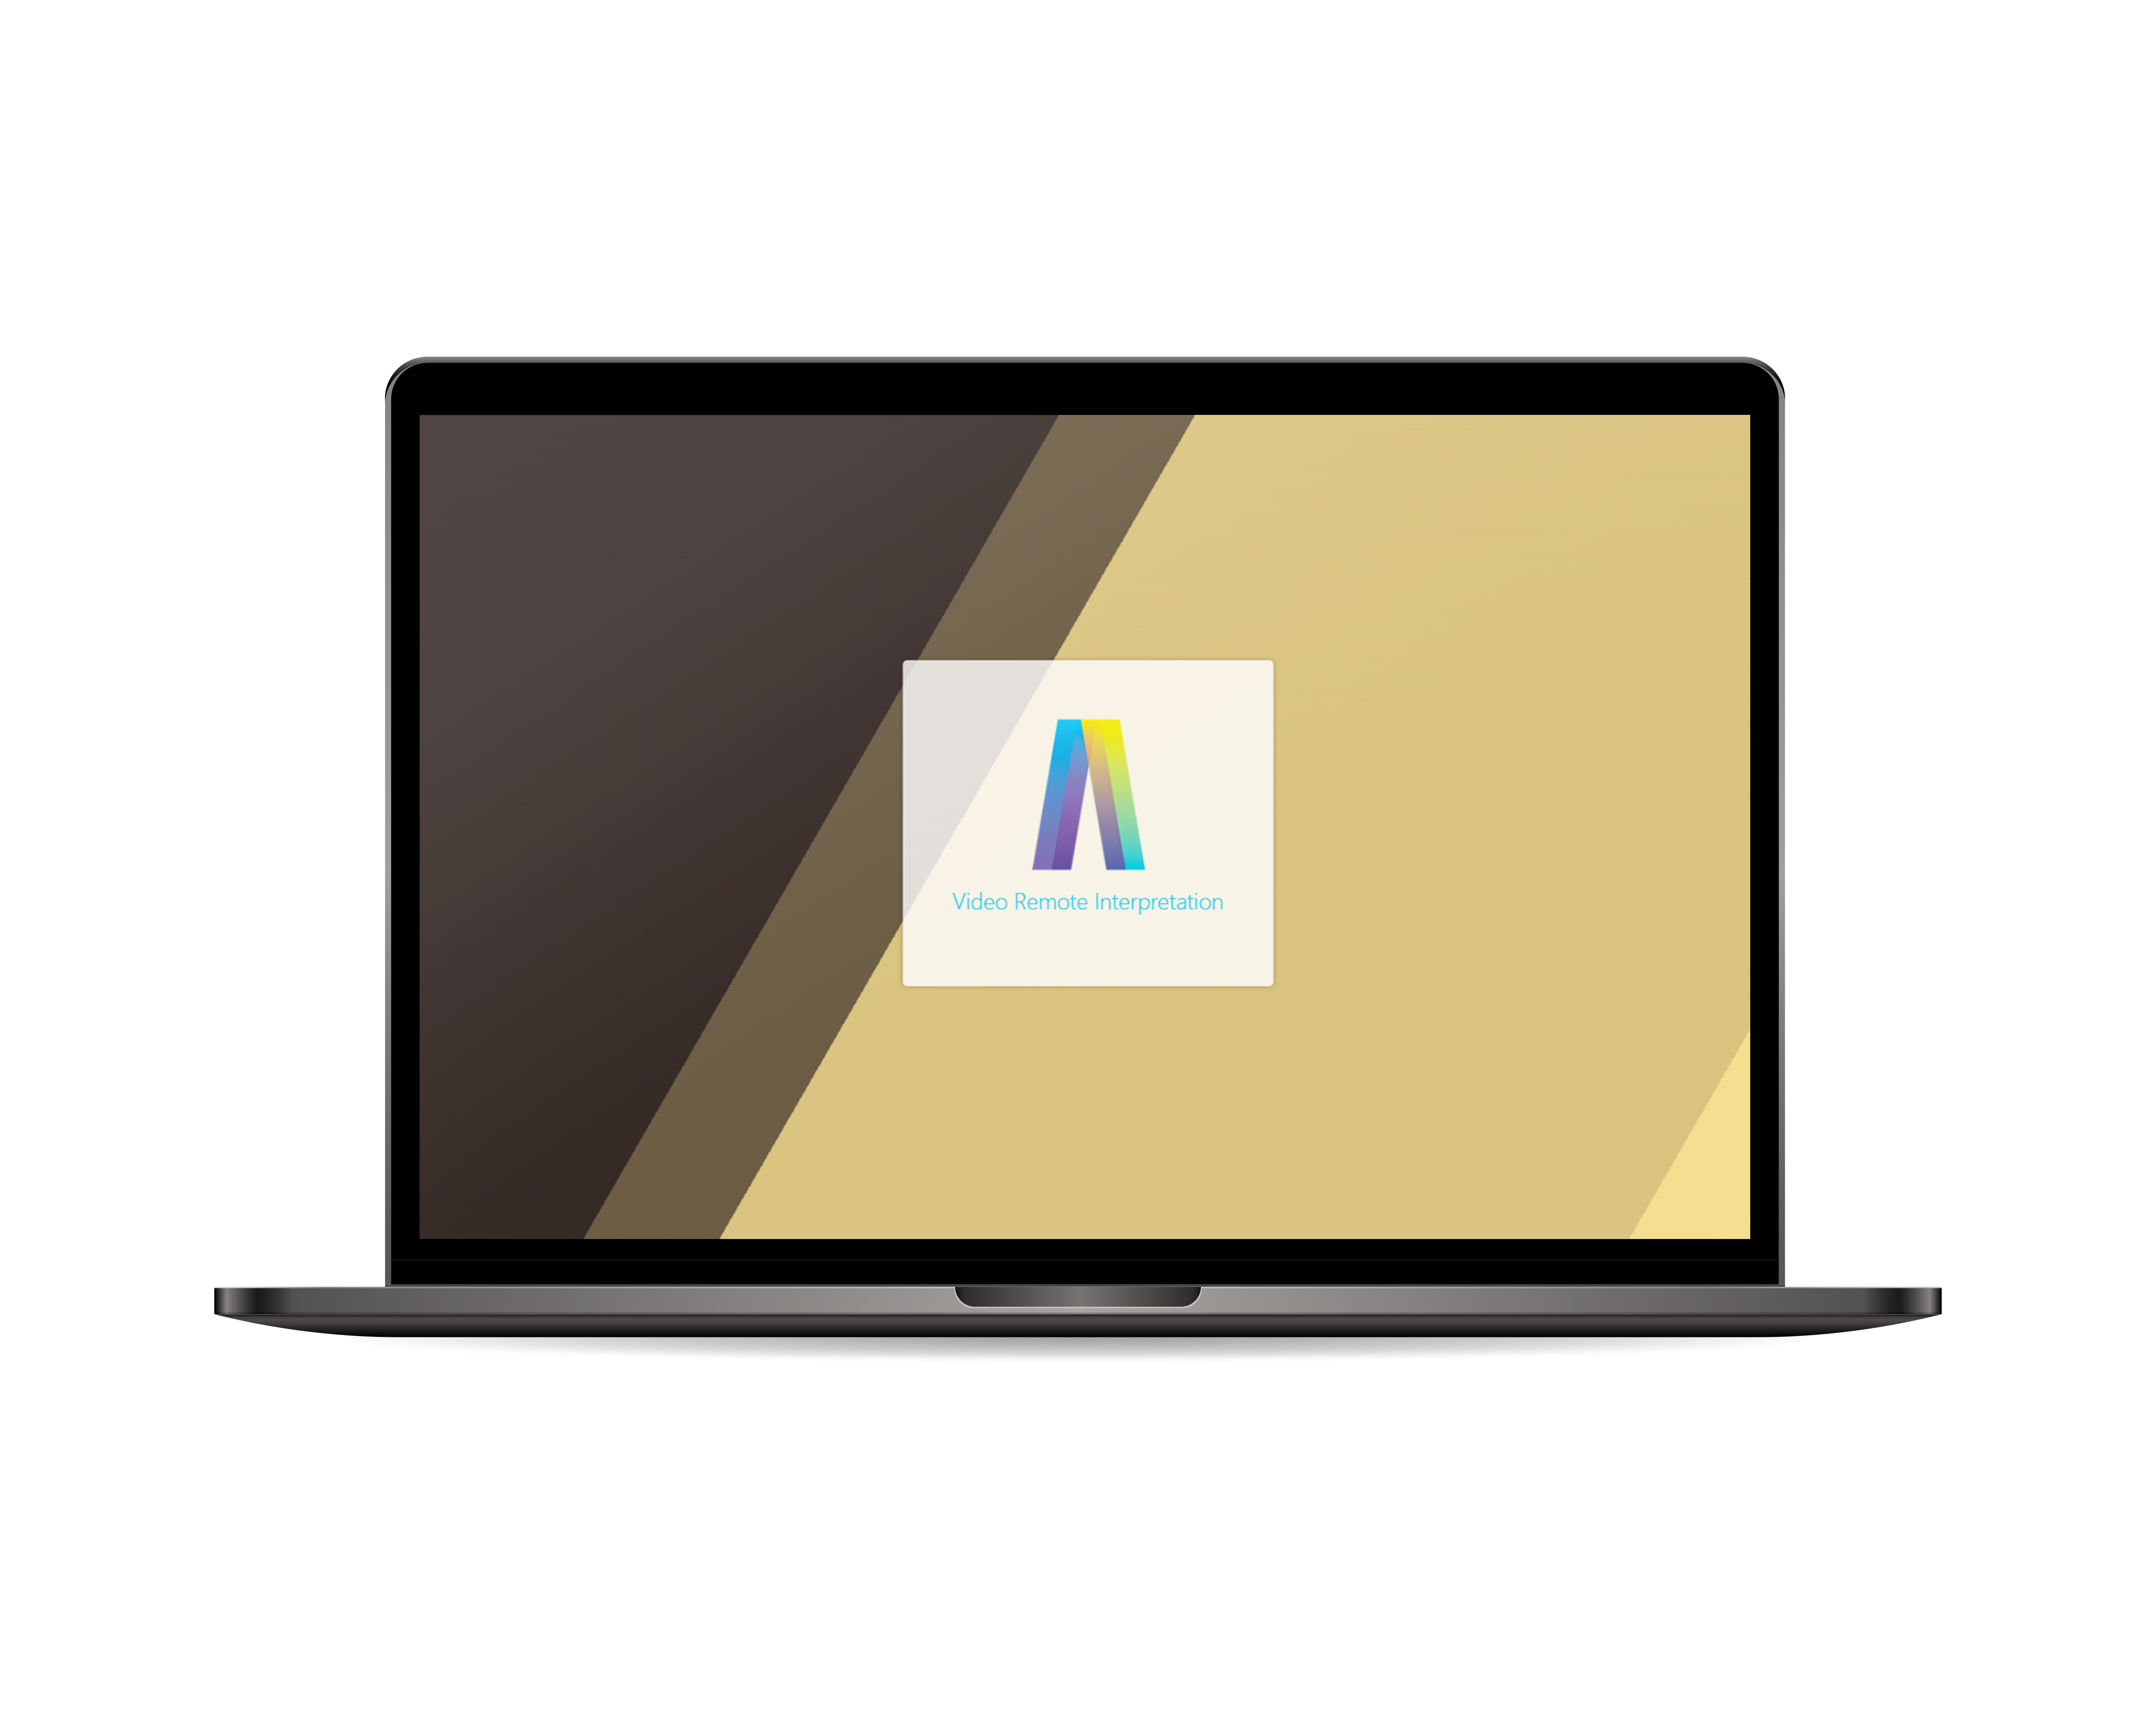 A laptop with an open screen displaying a two-tone brown and beige background. a window in the center shows an icon with "a" and the text "video remote interpretation.